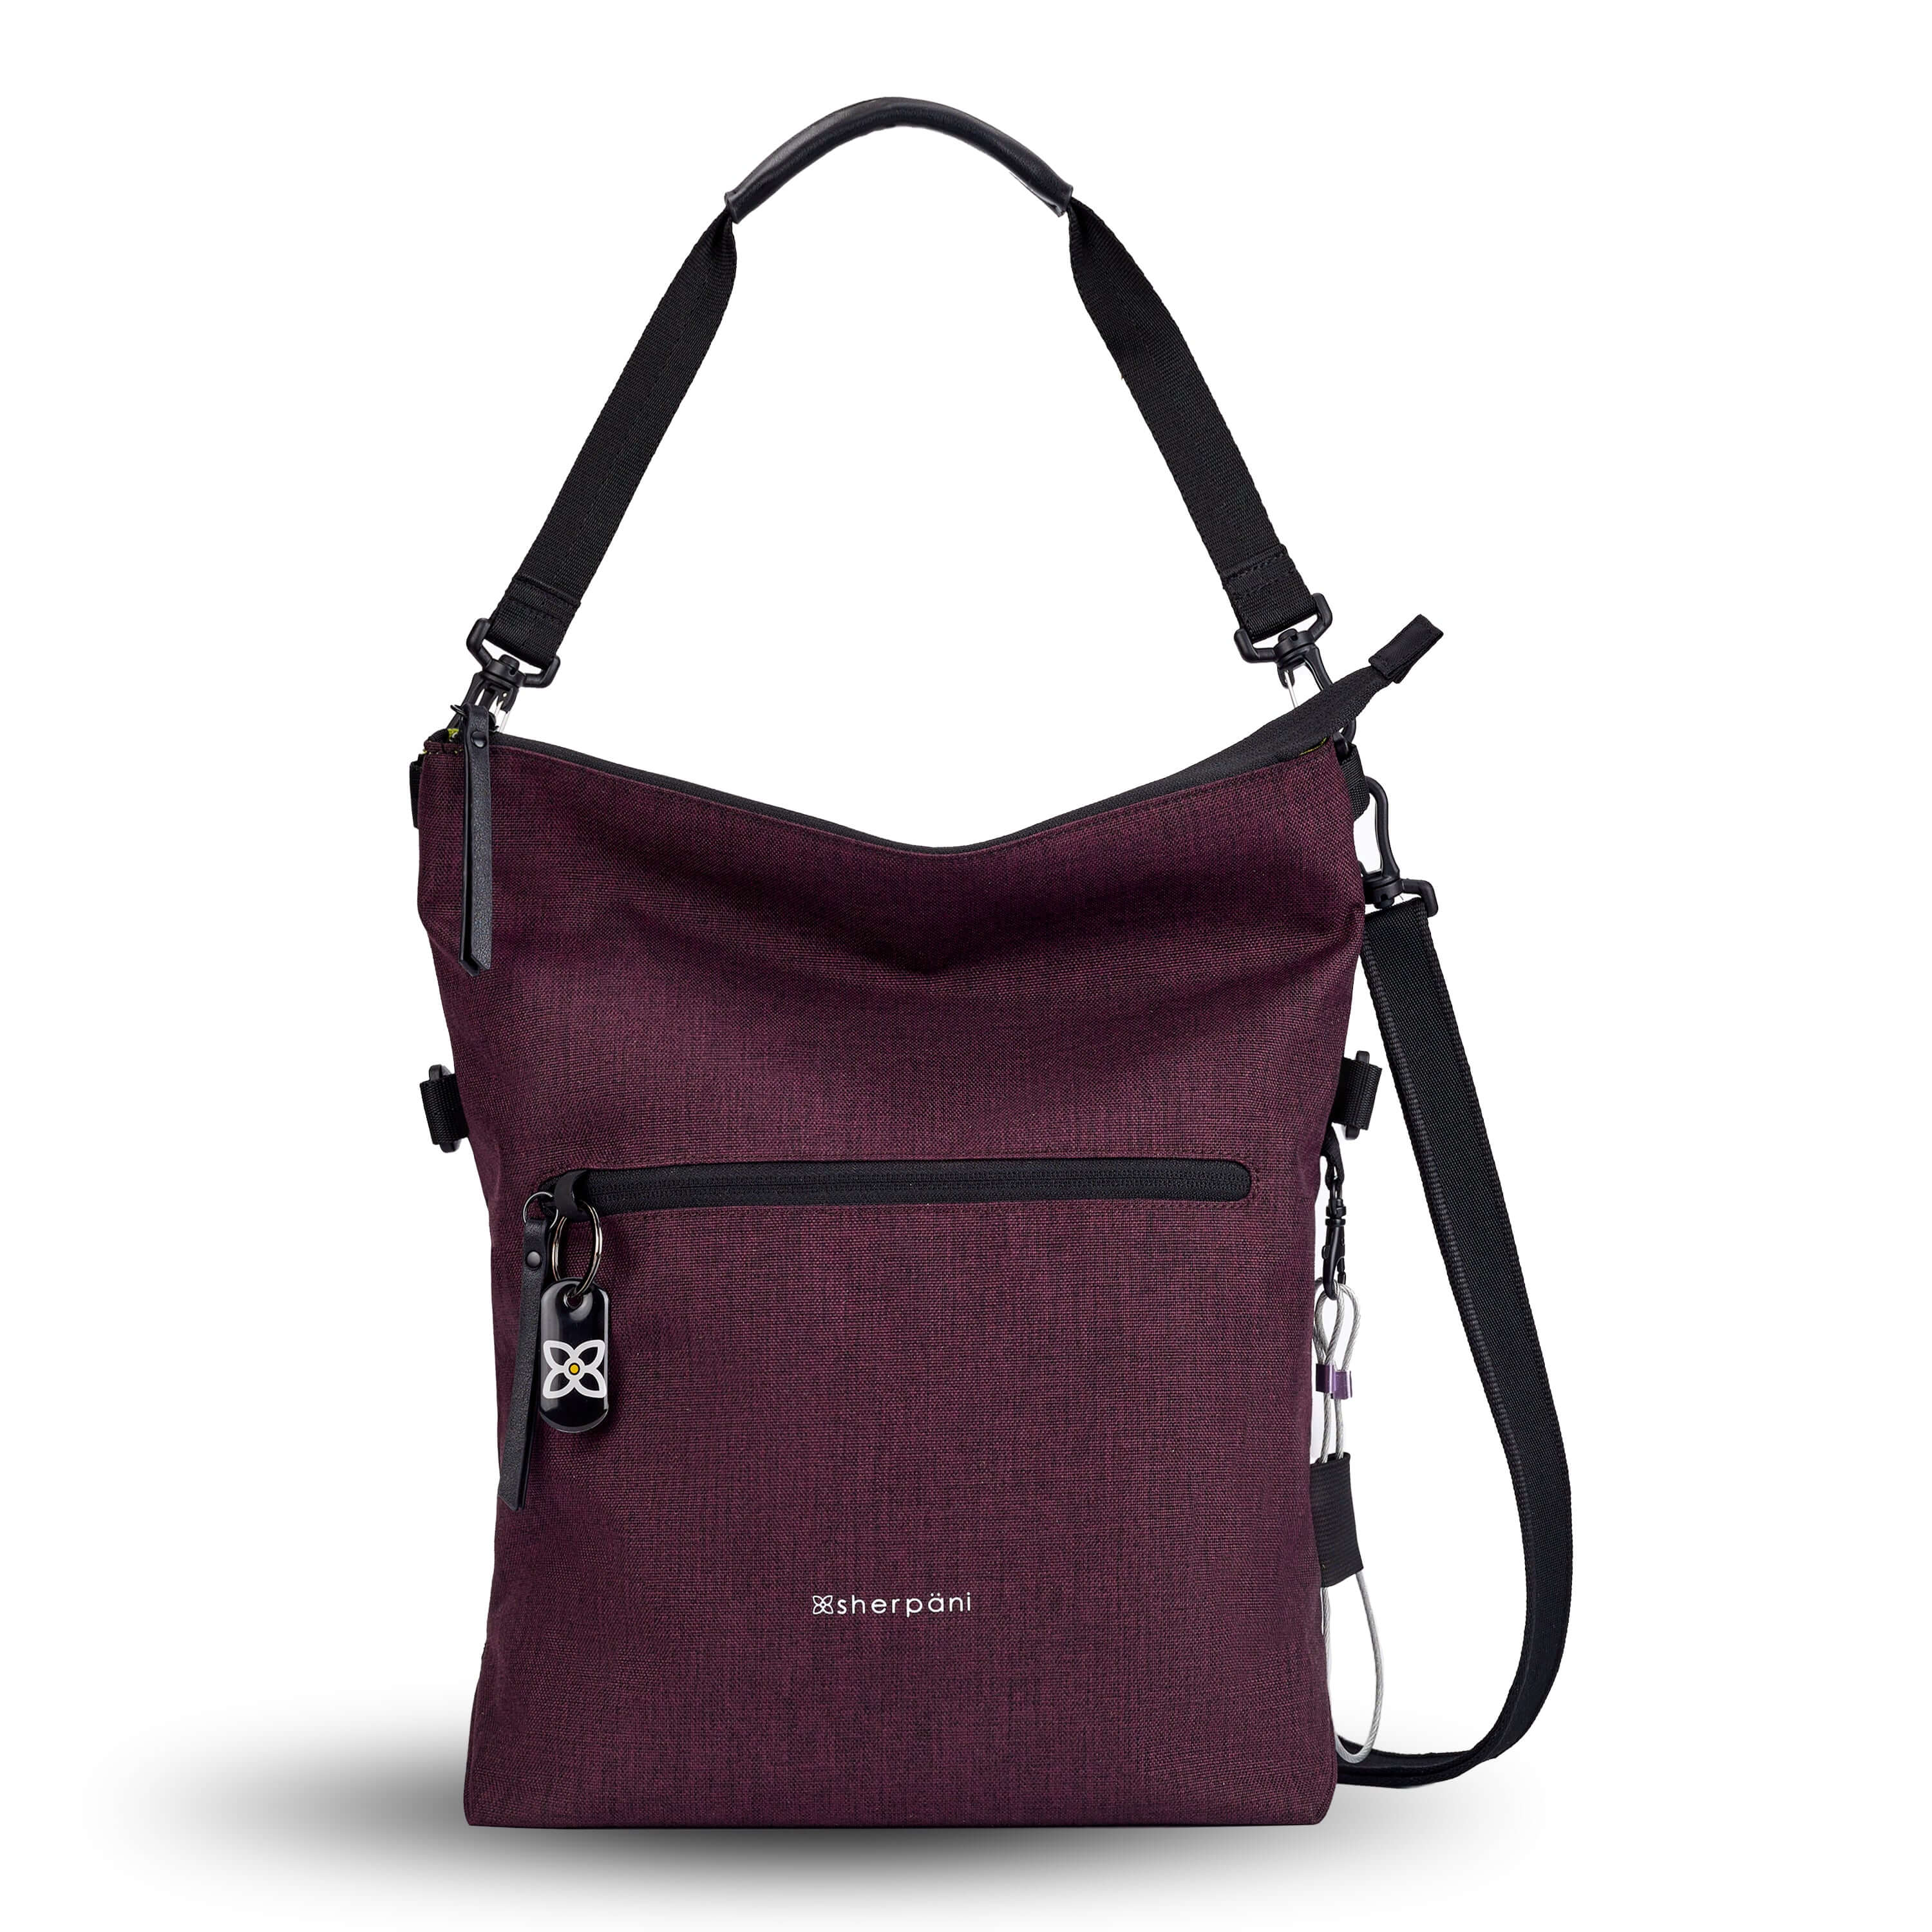 Flat front view of Sherpani's Anti-Theft bag, the Vale AT in Merlot with vegan leather accents in black. The bag is standing tall with a detachable tote strap clipped to the top. There is an adjustable/detachable crossbody strap and a chair loop lock is clipped to the side of the bag. The front features an external compartment with a locking zipper and ReturnMe tag. 